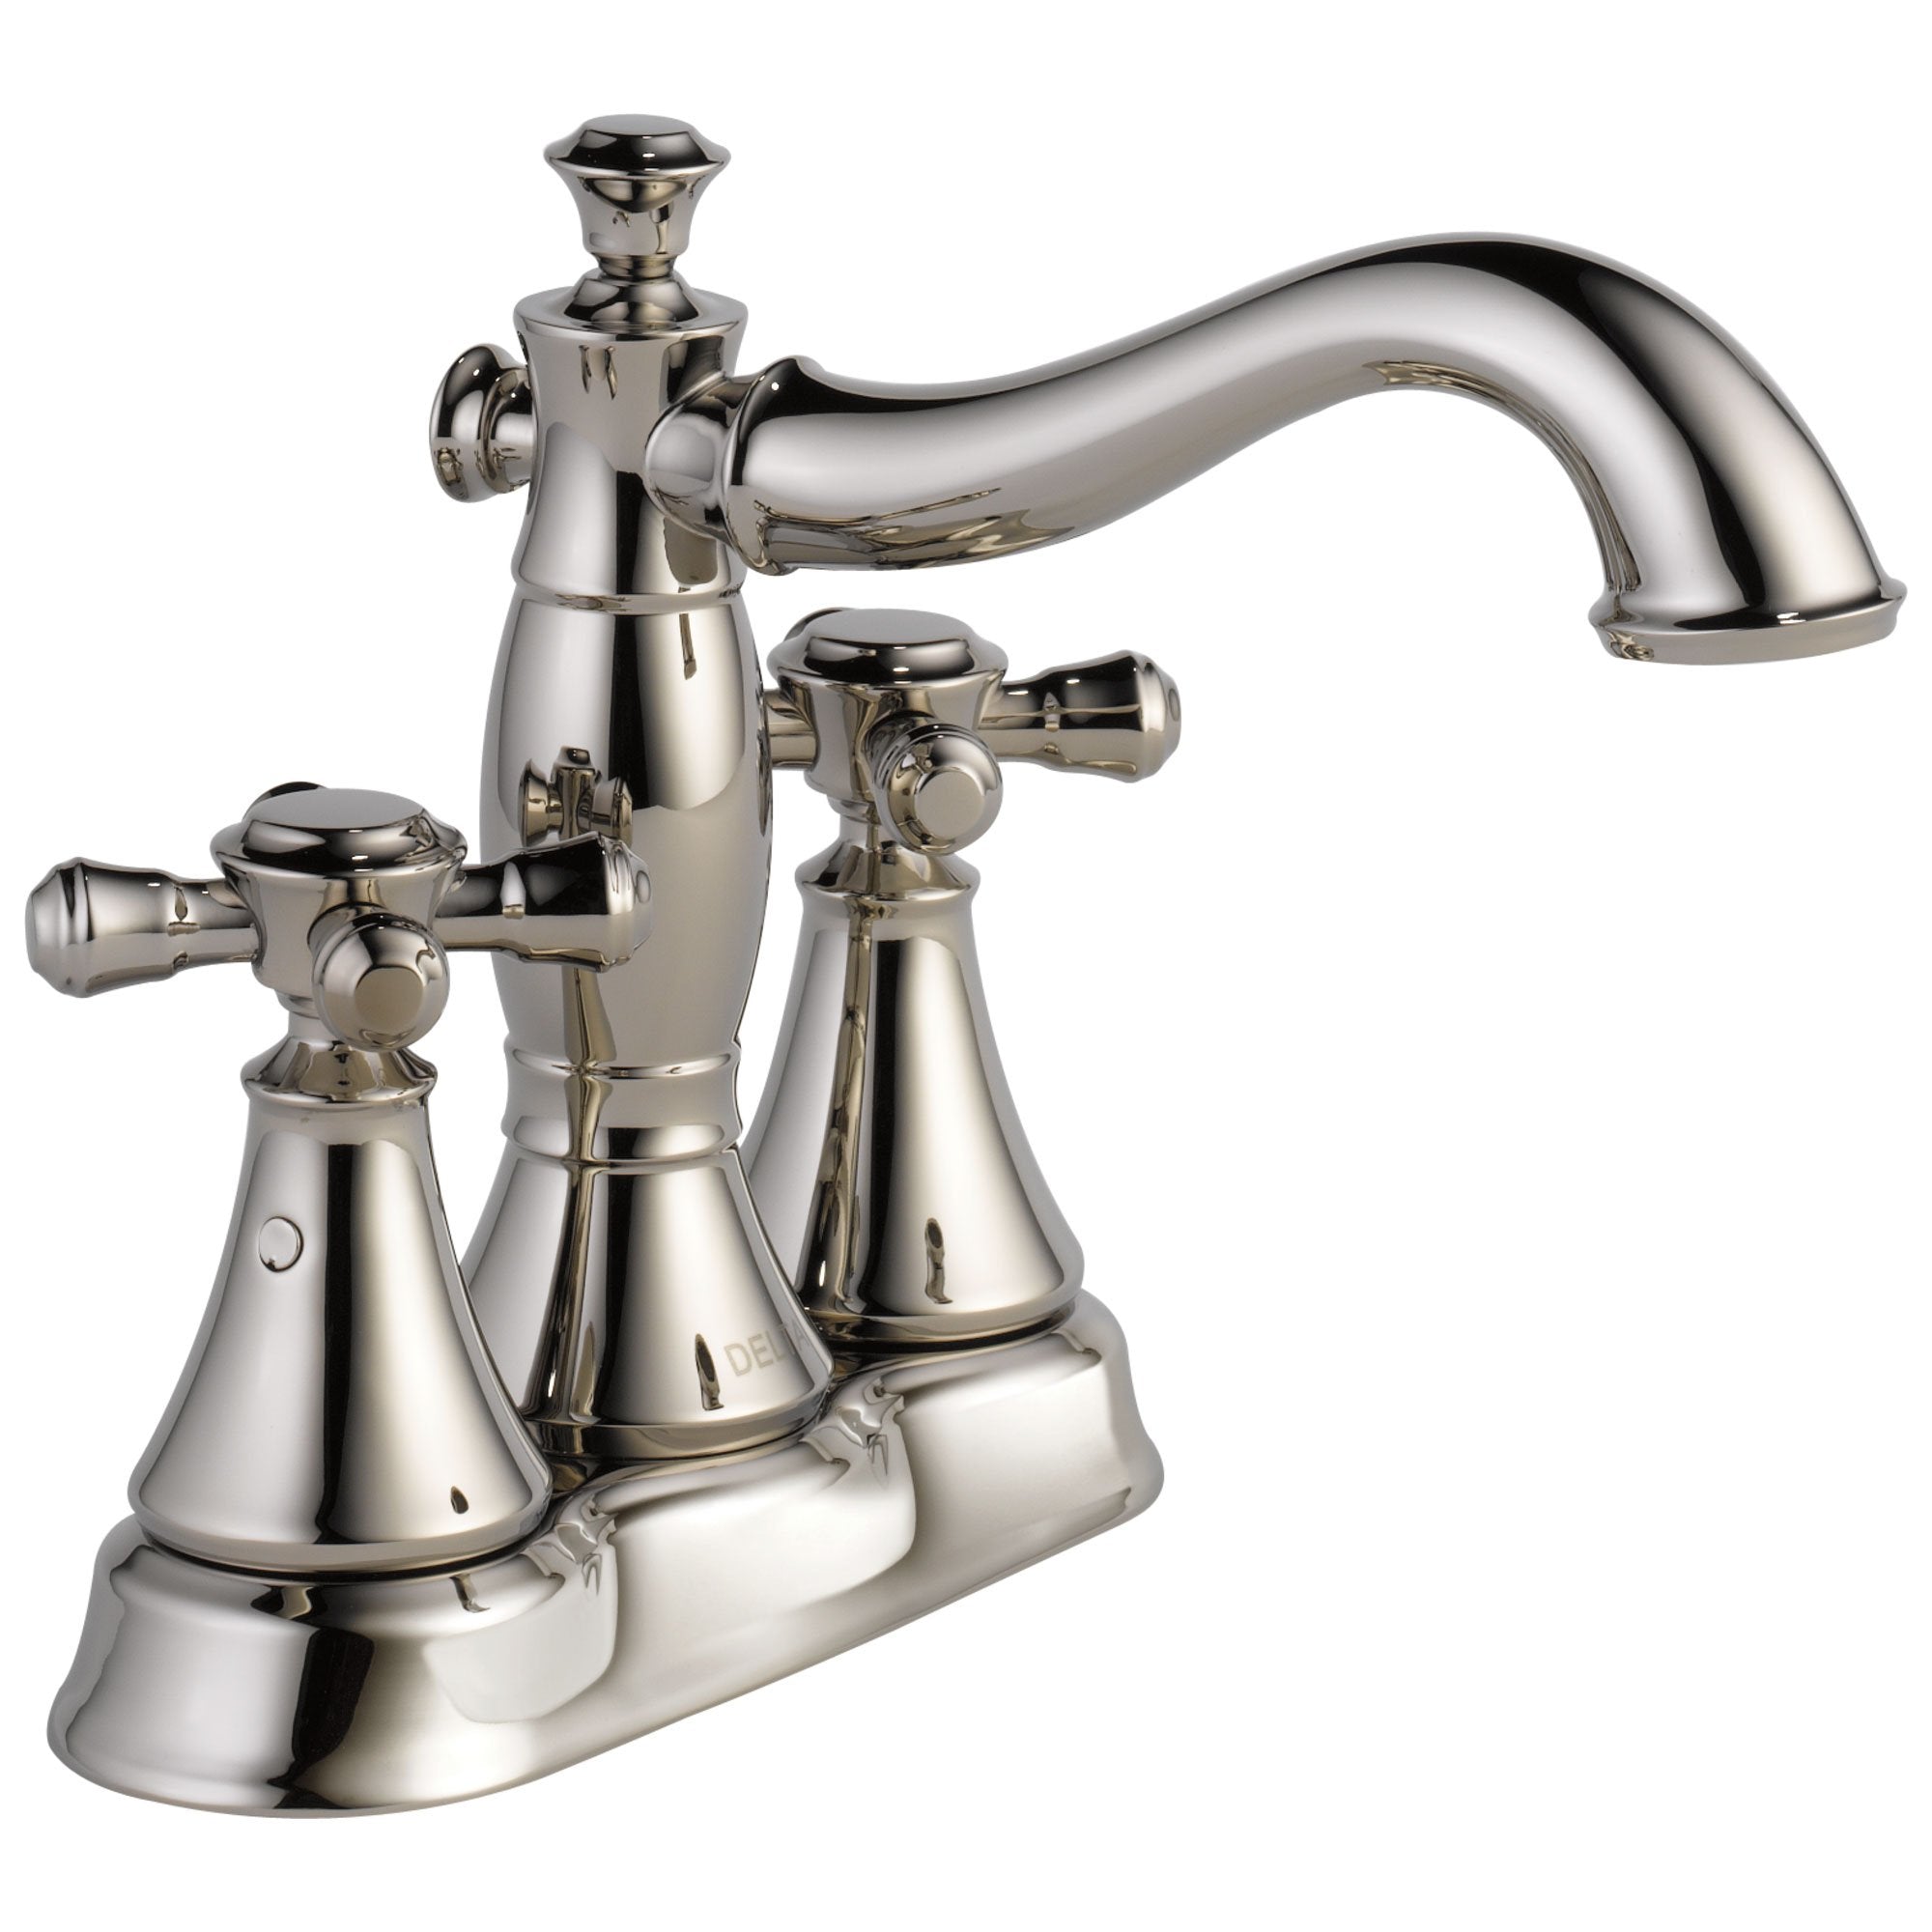 Delta Cassidy Collection Polished Nickel Finish 4" Centerset Lavatory Bathroom Faucet INCLUDES Two Cross Handles and Metal Pop-Up Drain D1807V